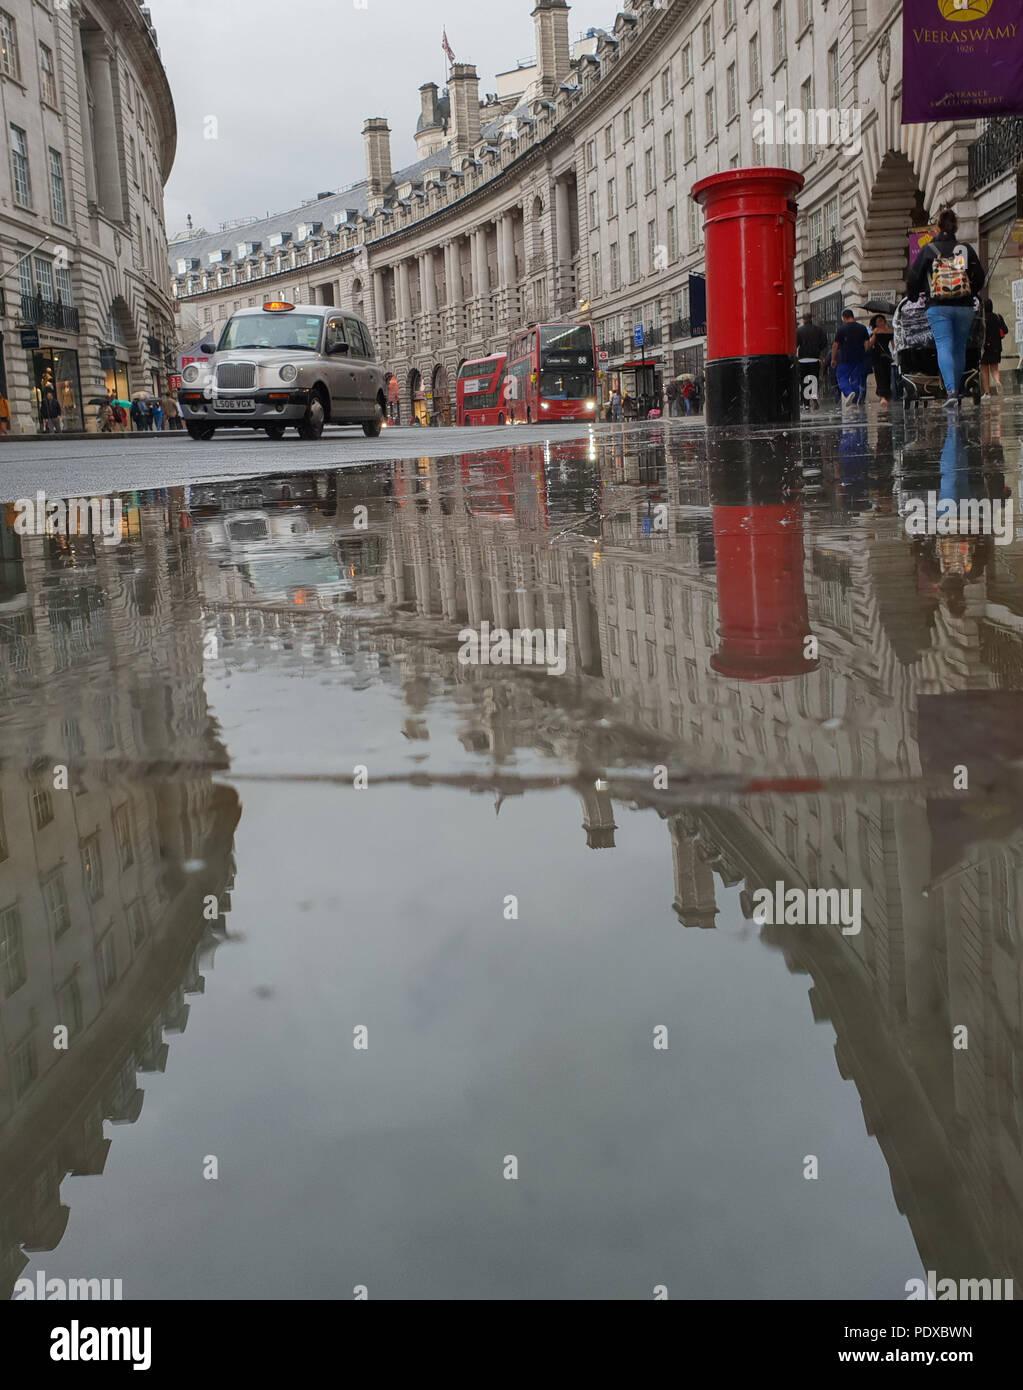 Regents Street. London. UK 10 Aug 2018 - A reflection of London black taxi and a postbox in a large puddle of rain water in Regent Street after a heavy rainfalls in central London.  Credit Roamwithrakhee /Alamy Live News Stock Photo